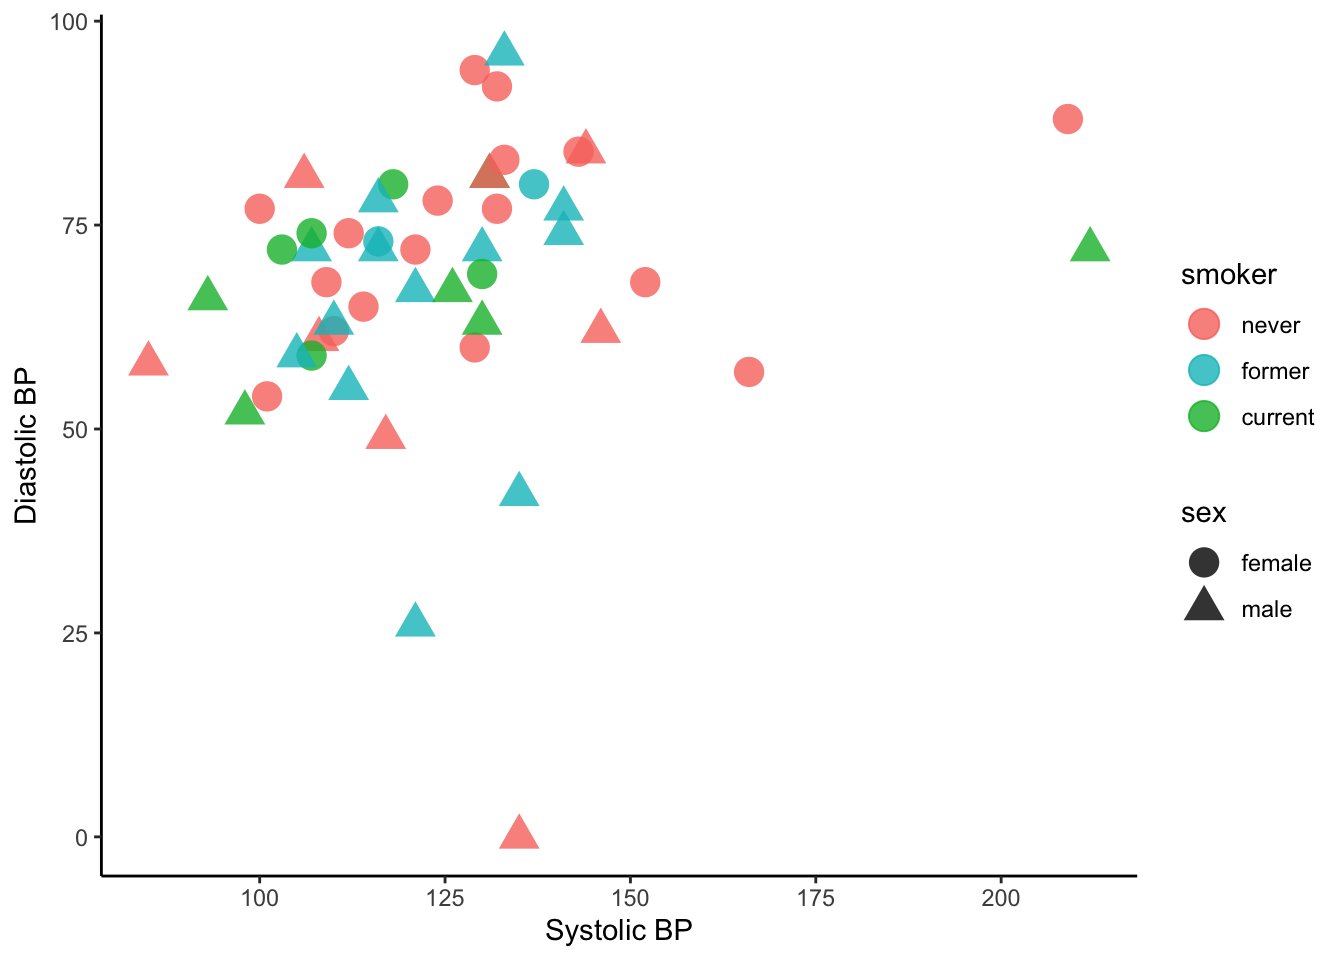 Scatterplot plot now has updated color scale for smoking status.